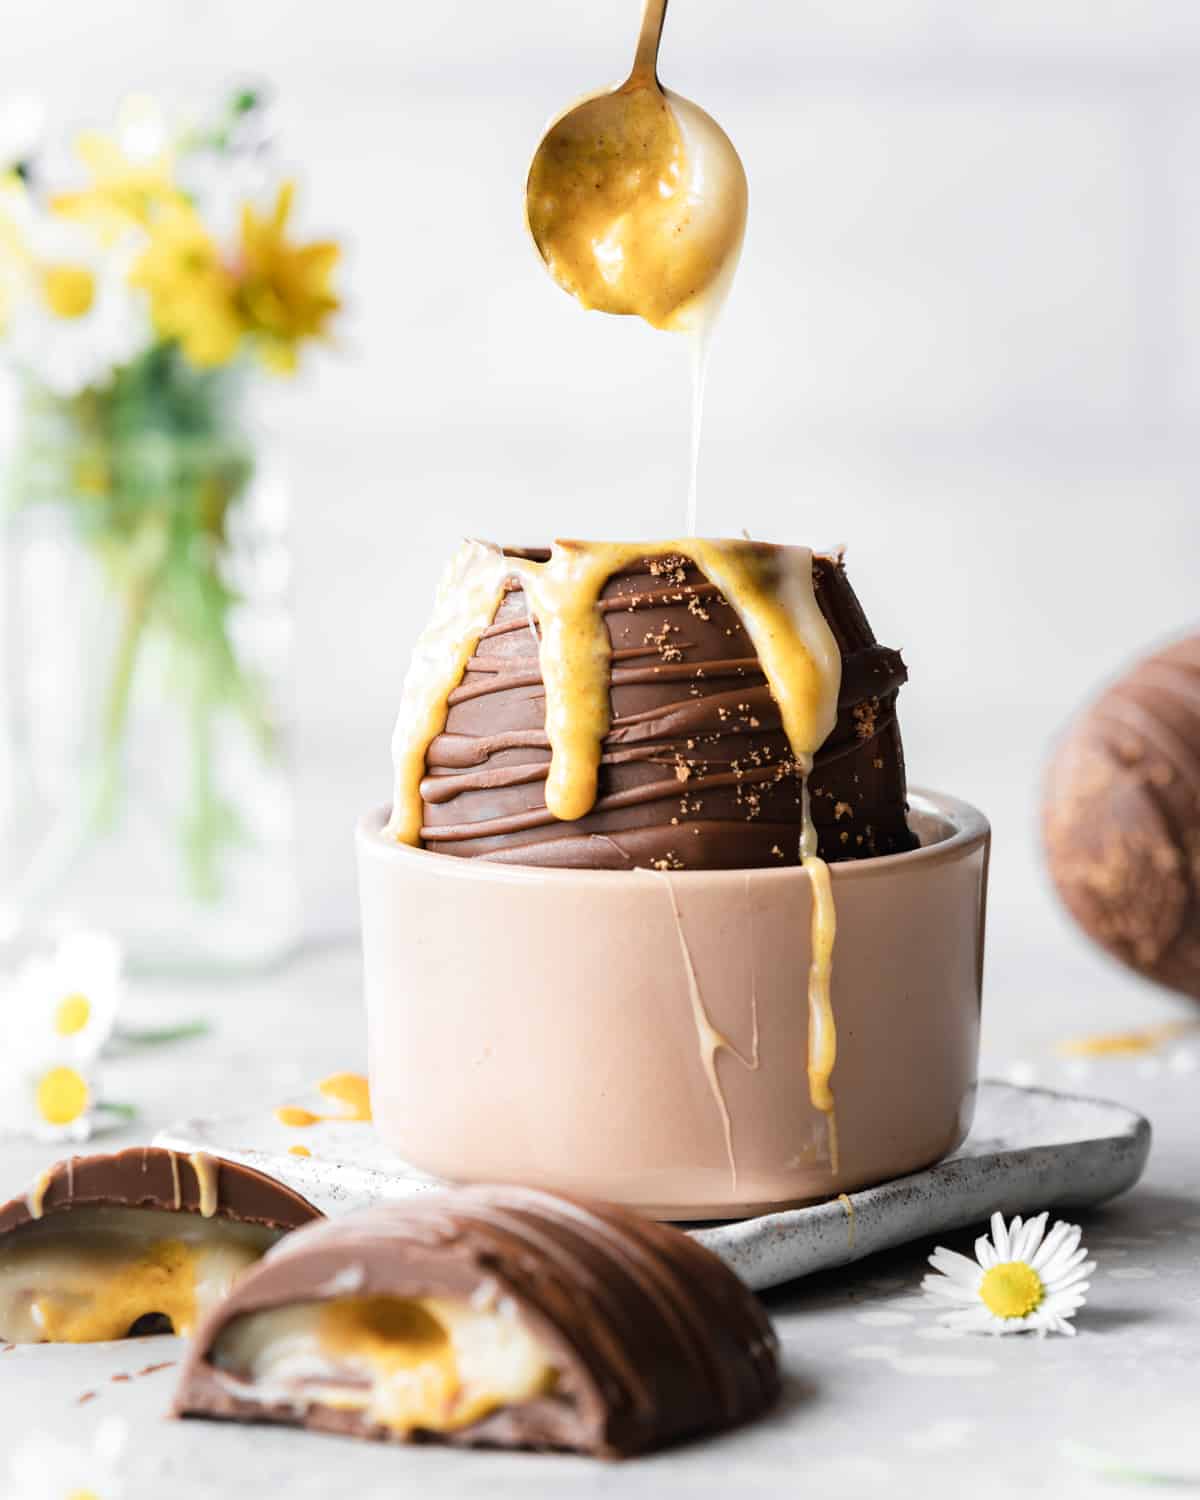 giant creme egg with spoon dipping into the yolk center.